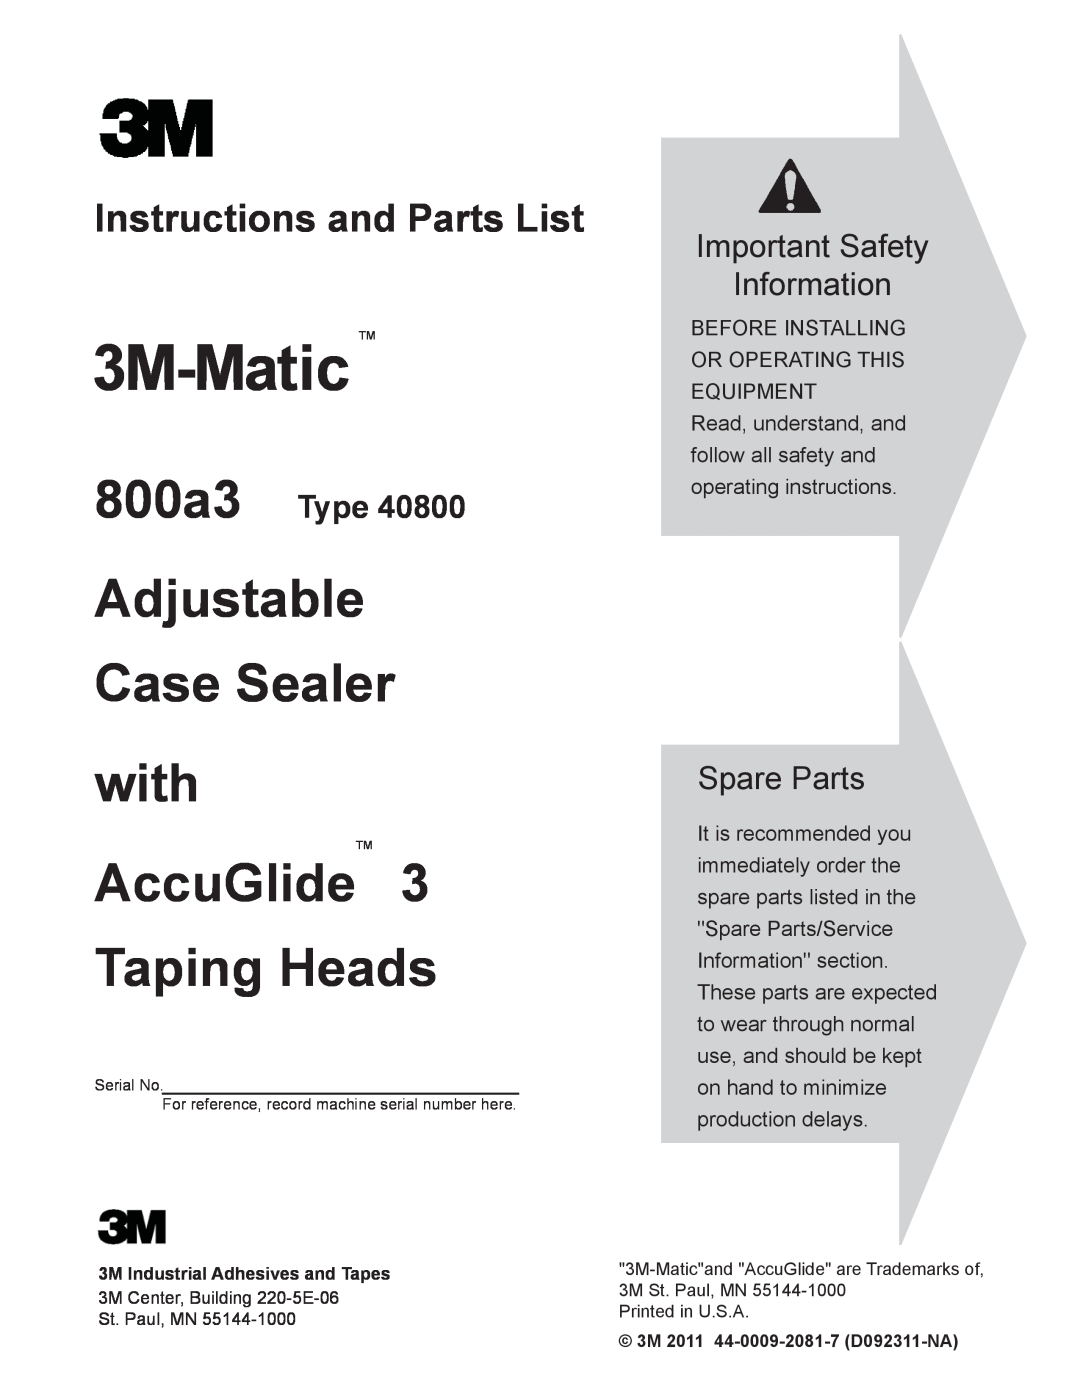 3M 800a3 manual Adjustable Case Sealer with AccuGlide, Taping Heads, Instructions and Parts List, Spare Parts, 3M-Matic 